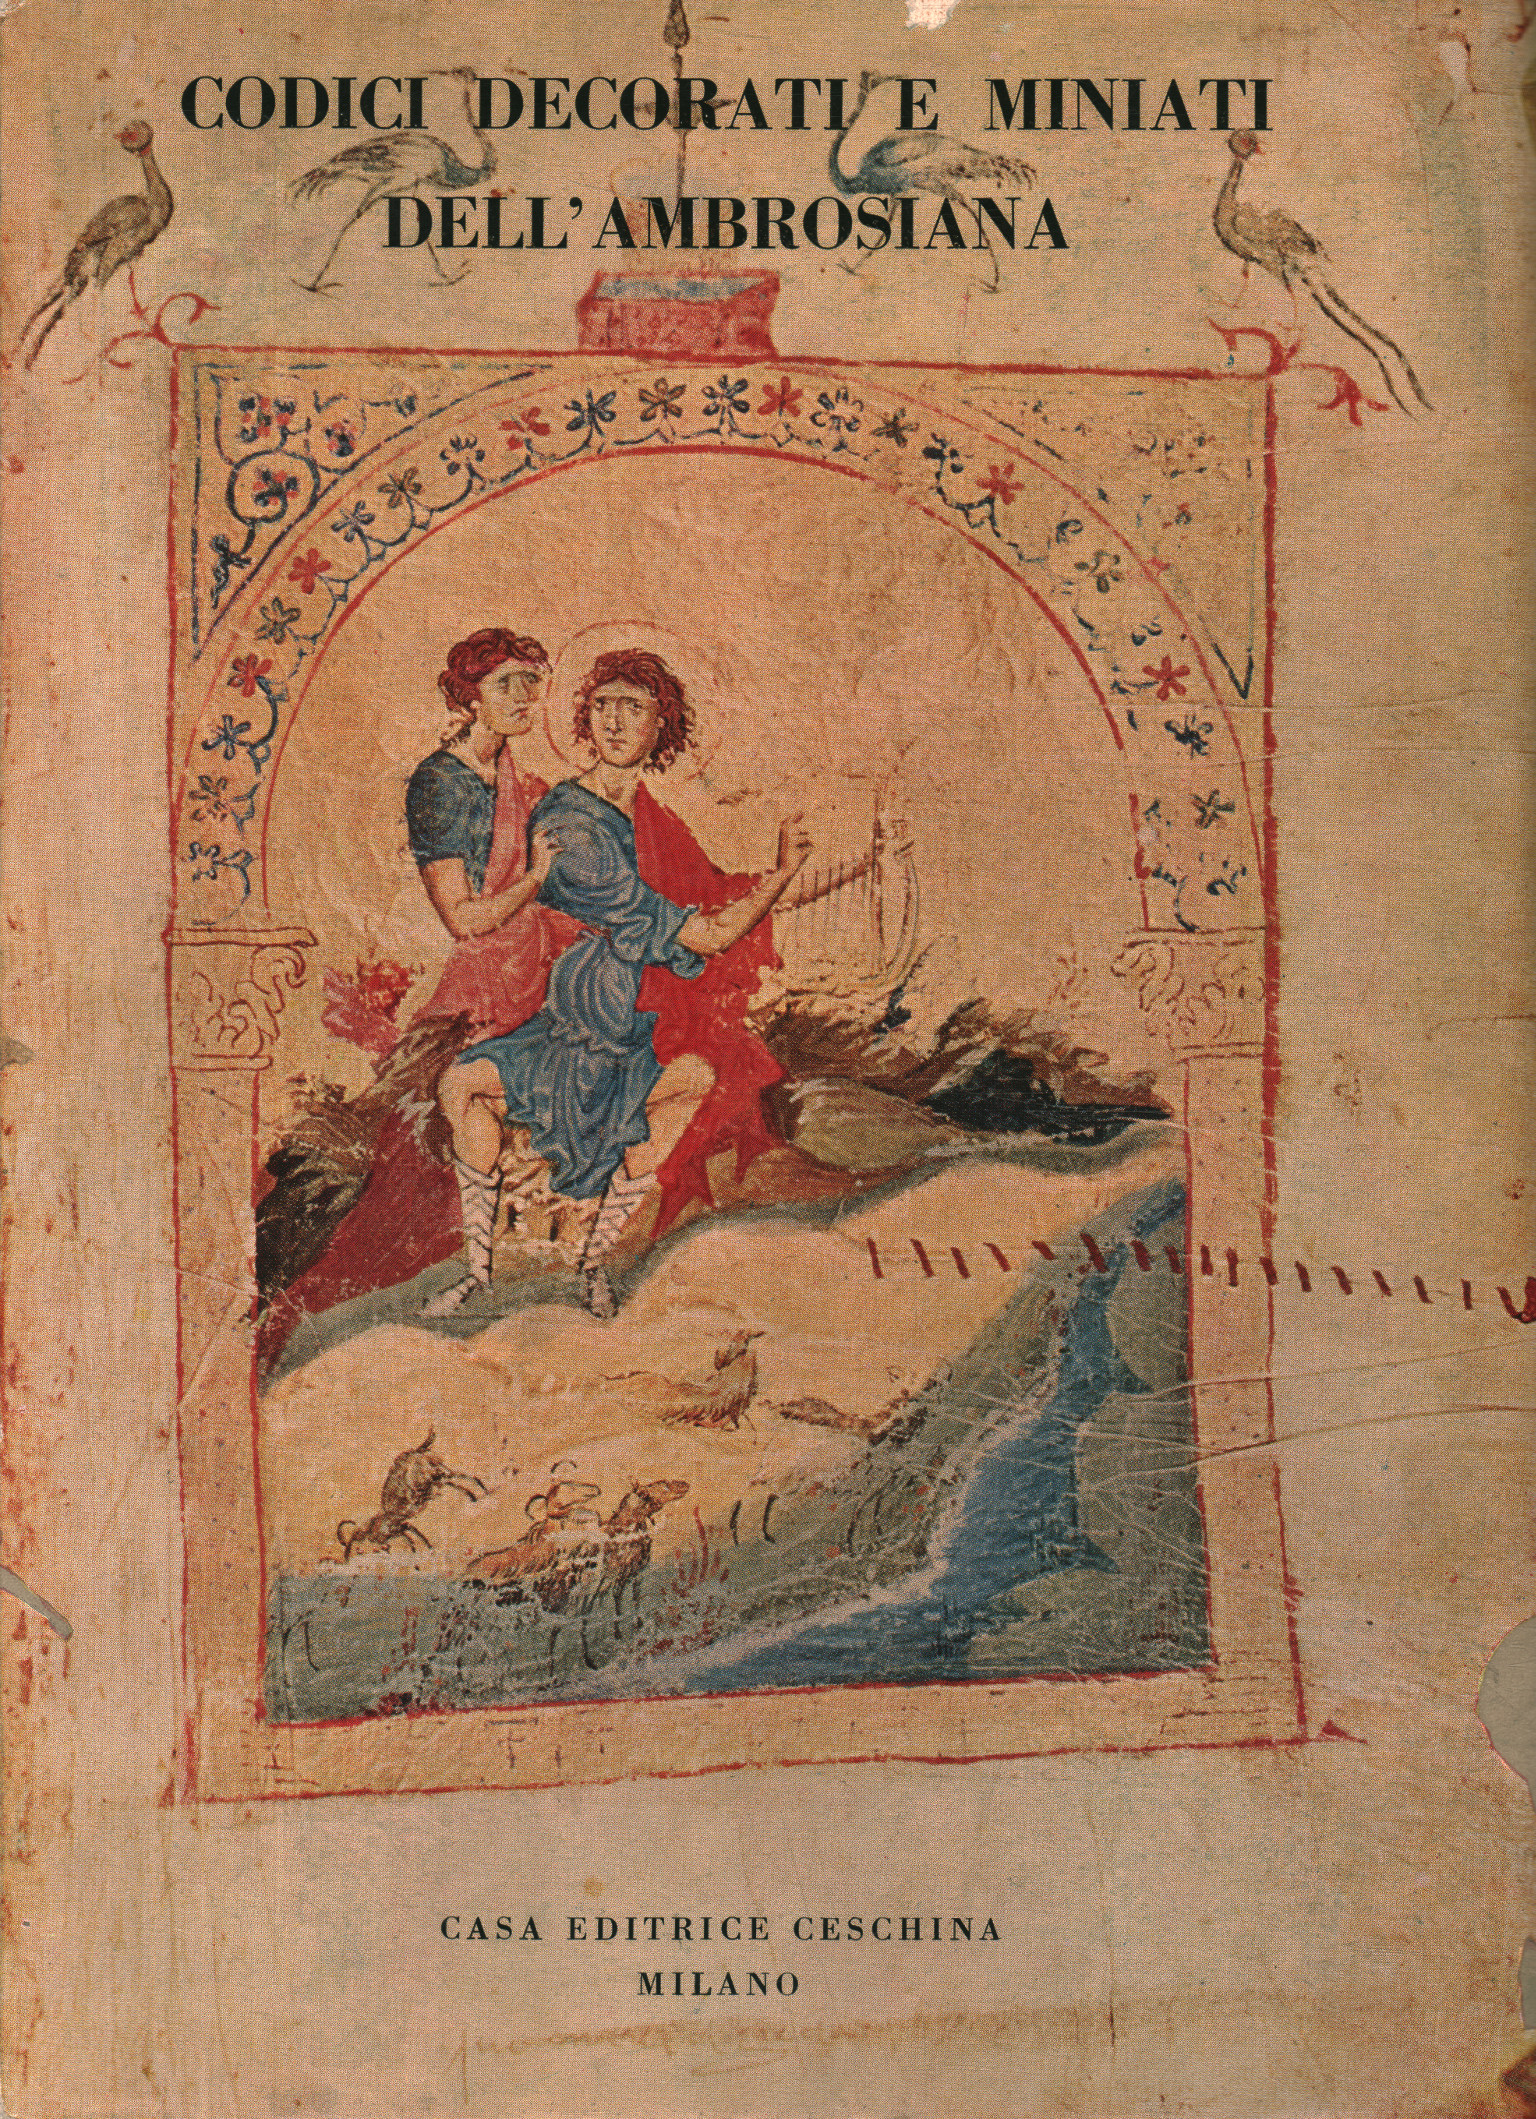 Decorated and illuminated codes of the